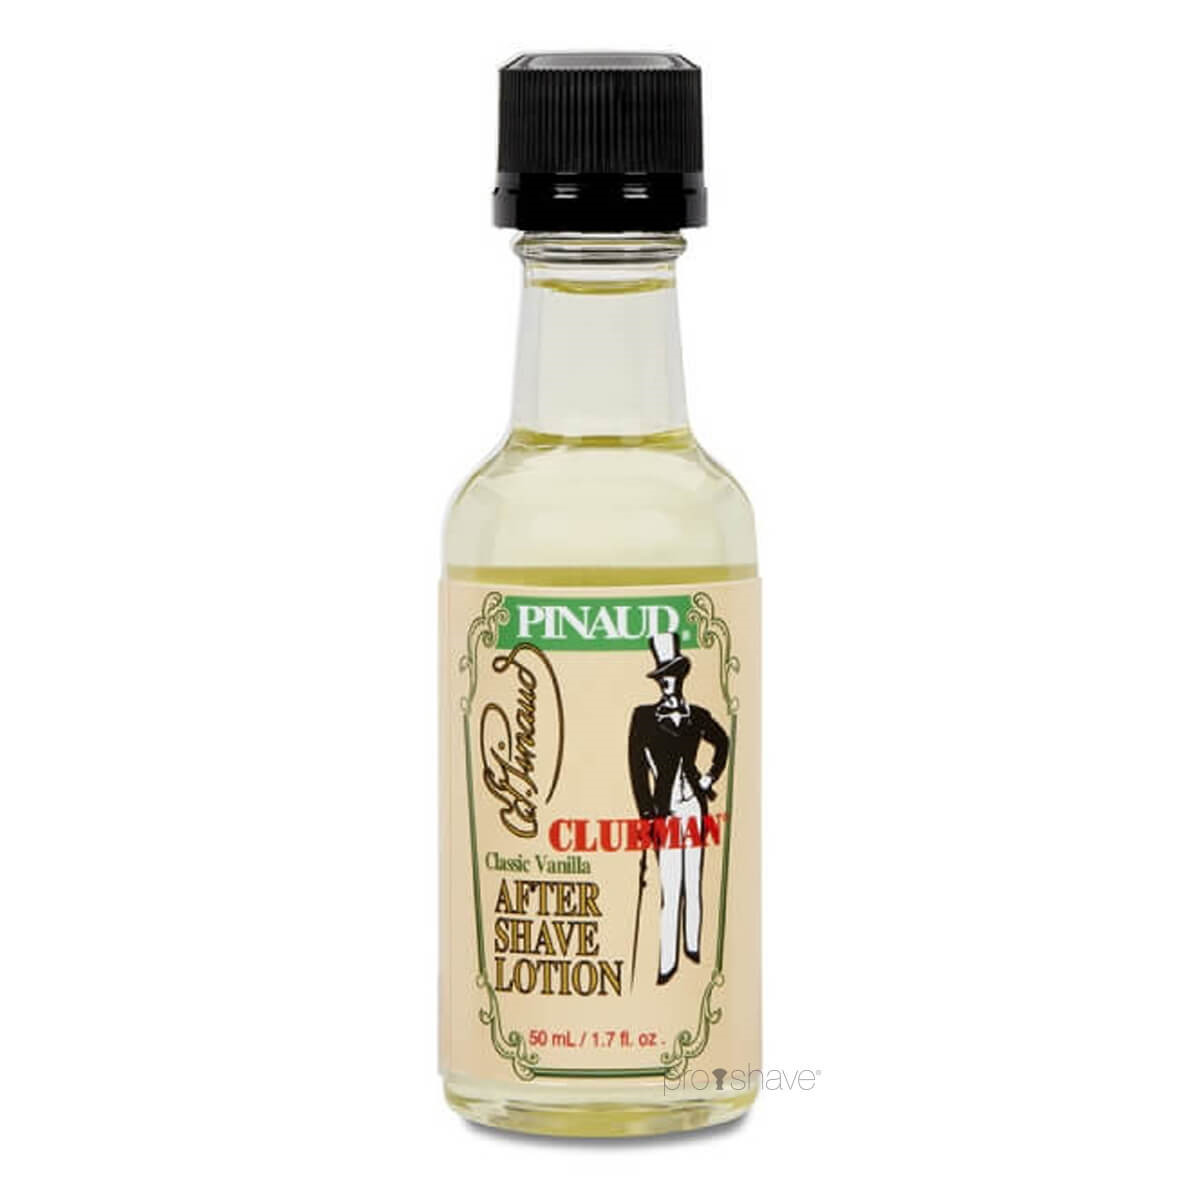 Pinaud Clubman Aftershave Lotion Classic Vanilla, 50 ml.